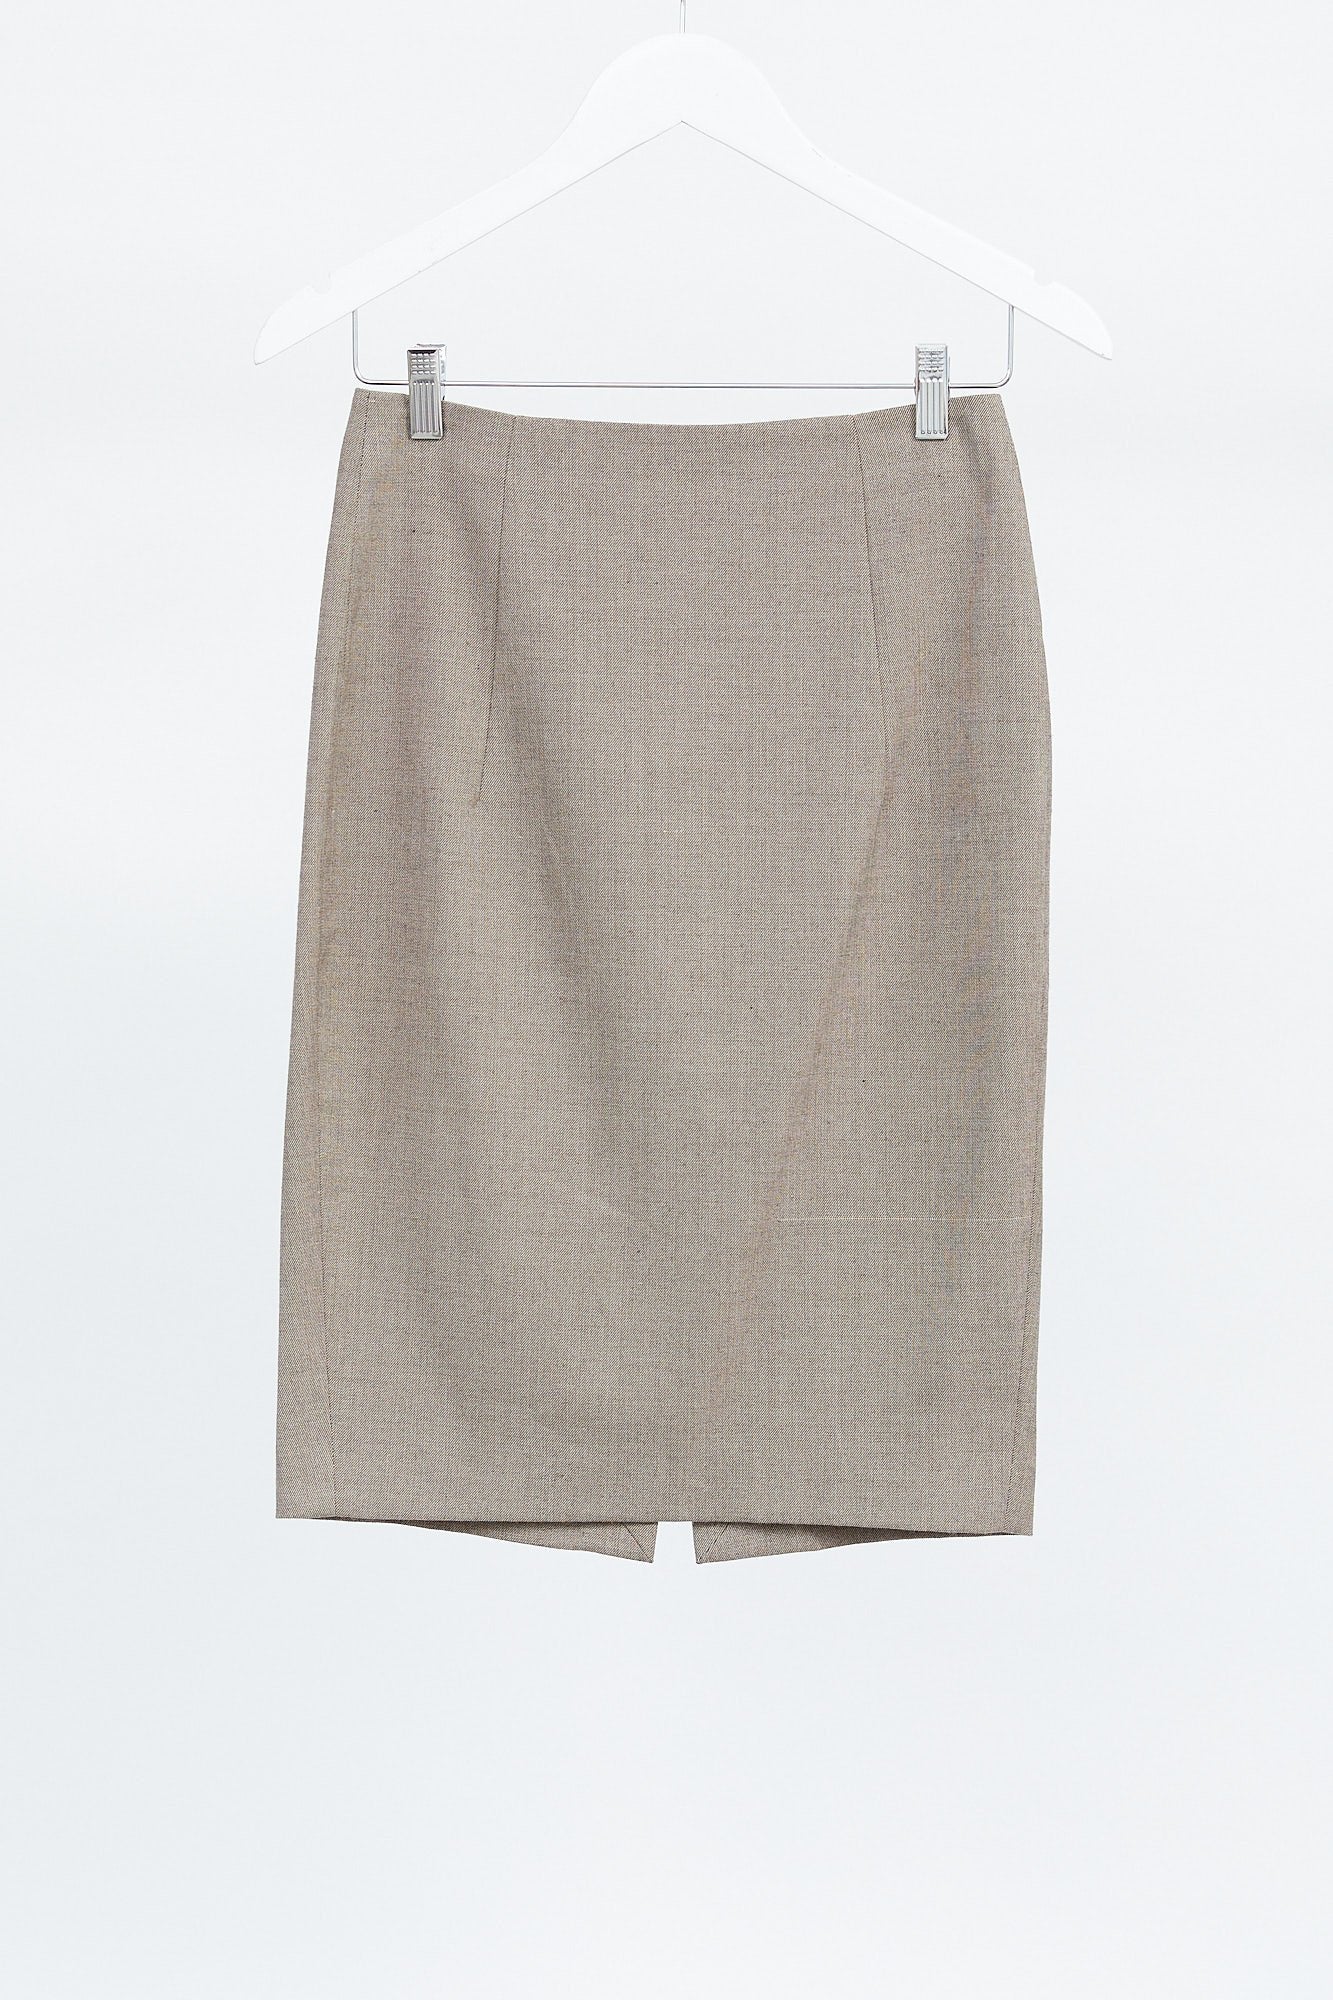 Womens Beige Pencil Skirt: Size Small